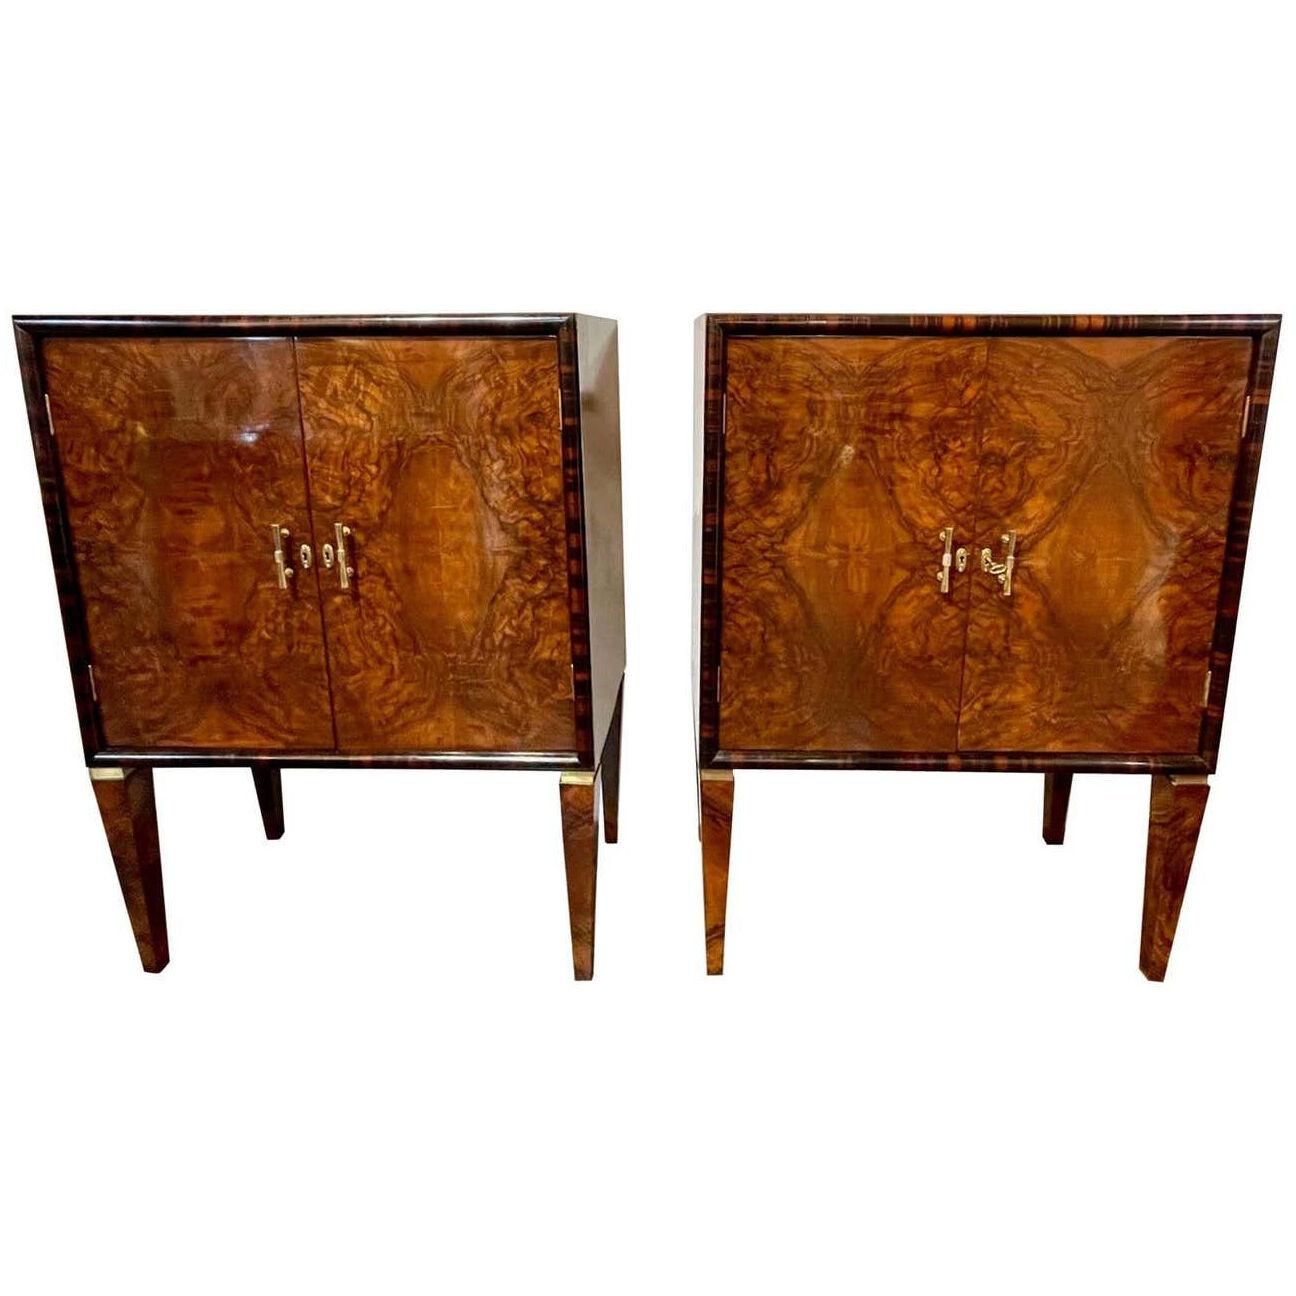 Pair of Italian Art Deco Period Walnut and Rosewood Bar Cabinets